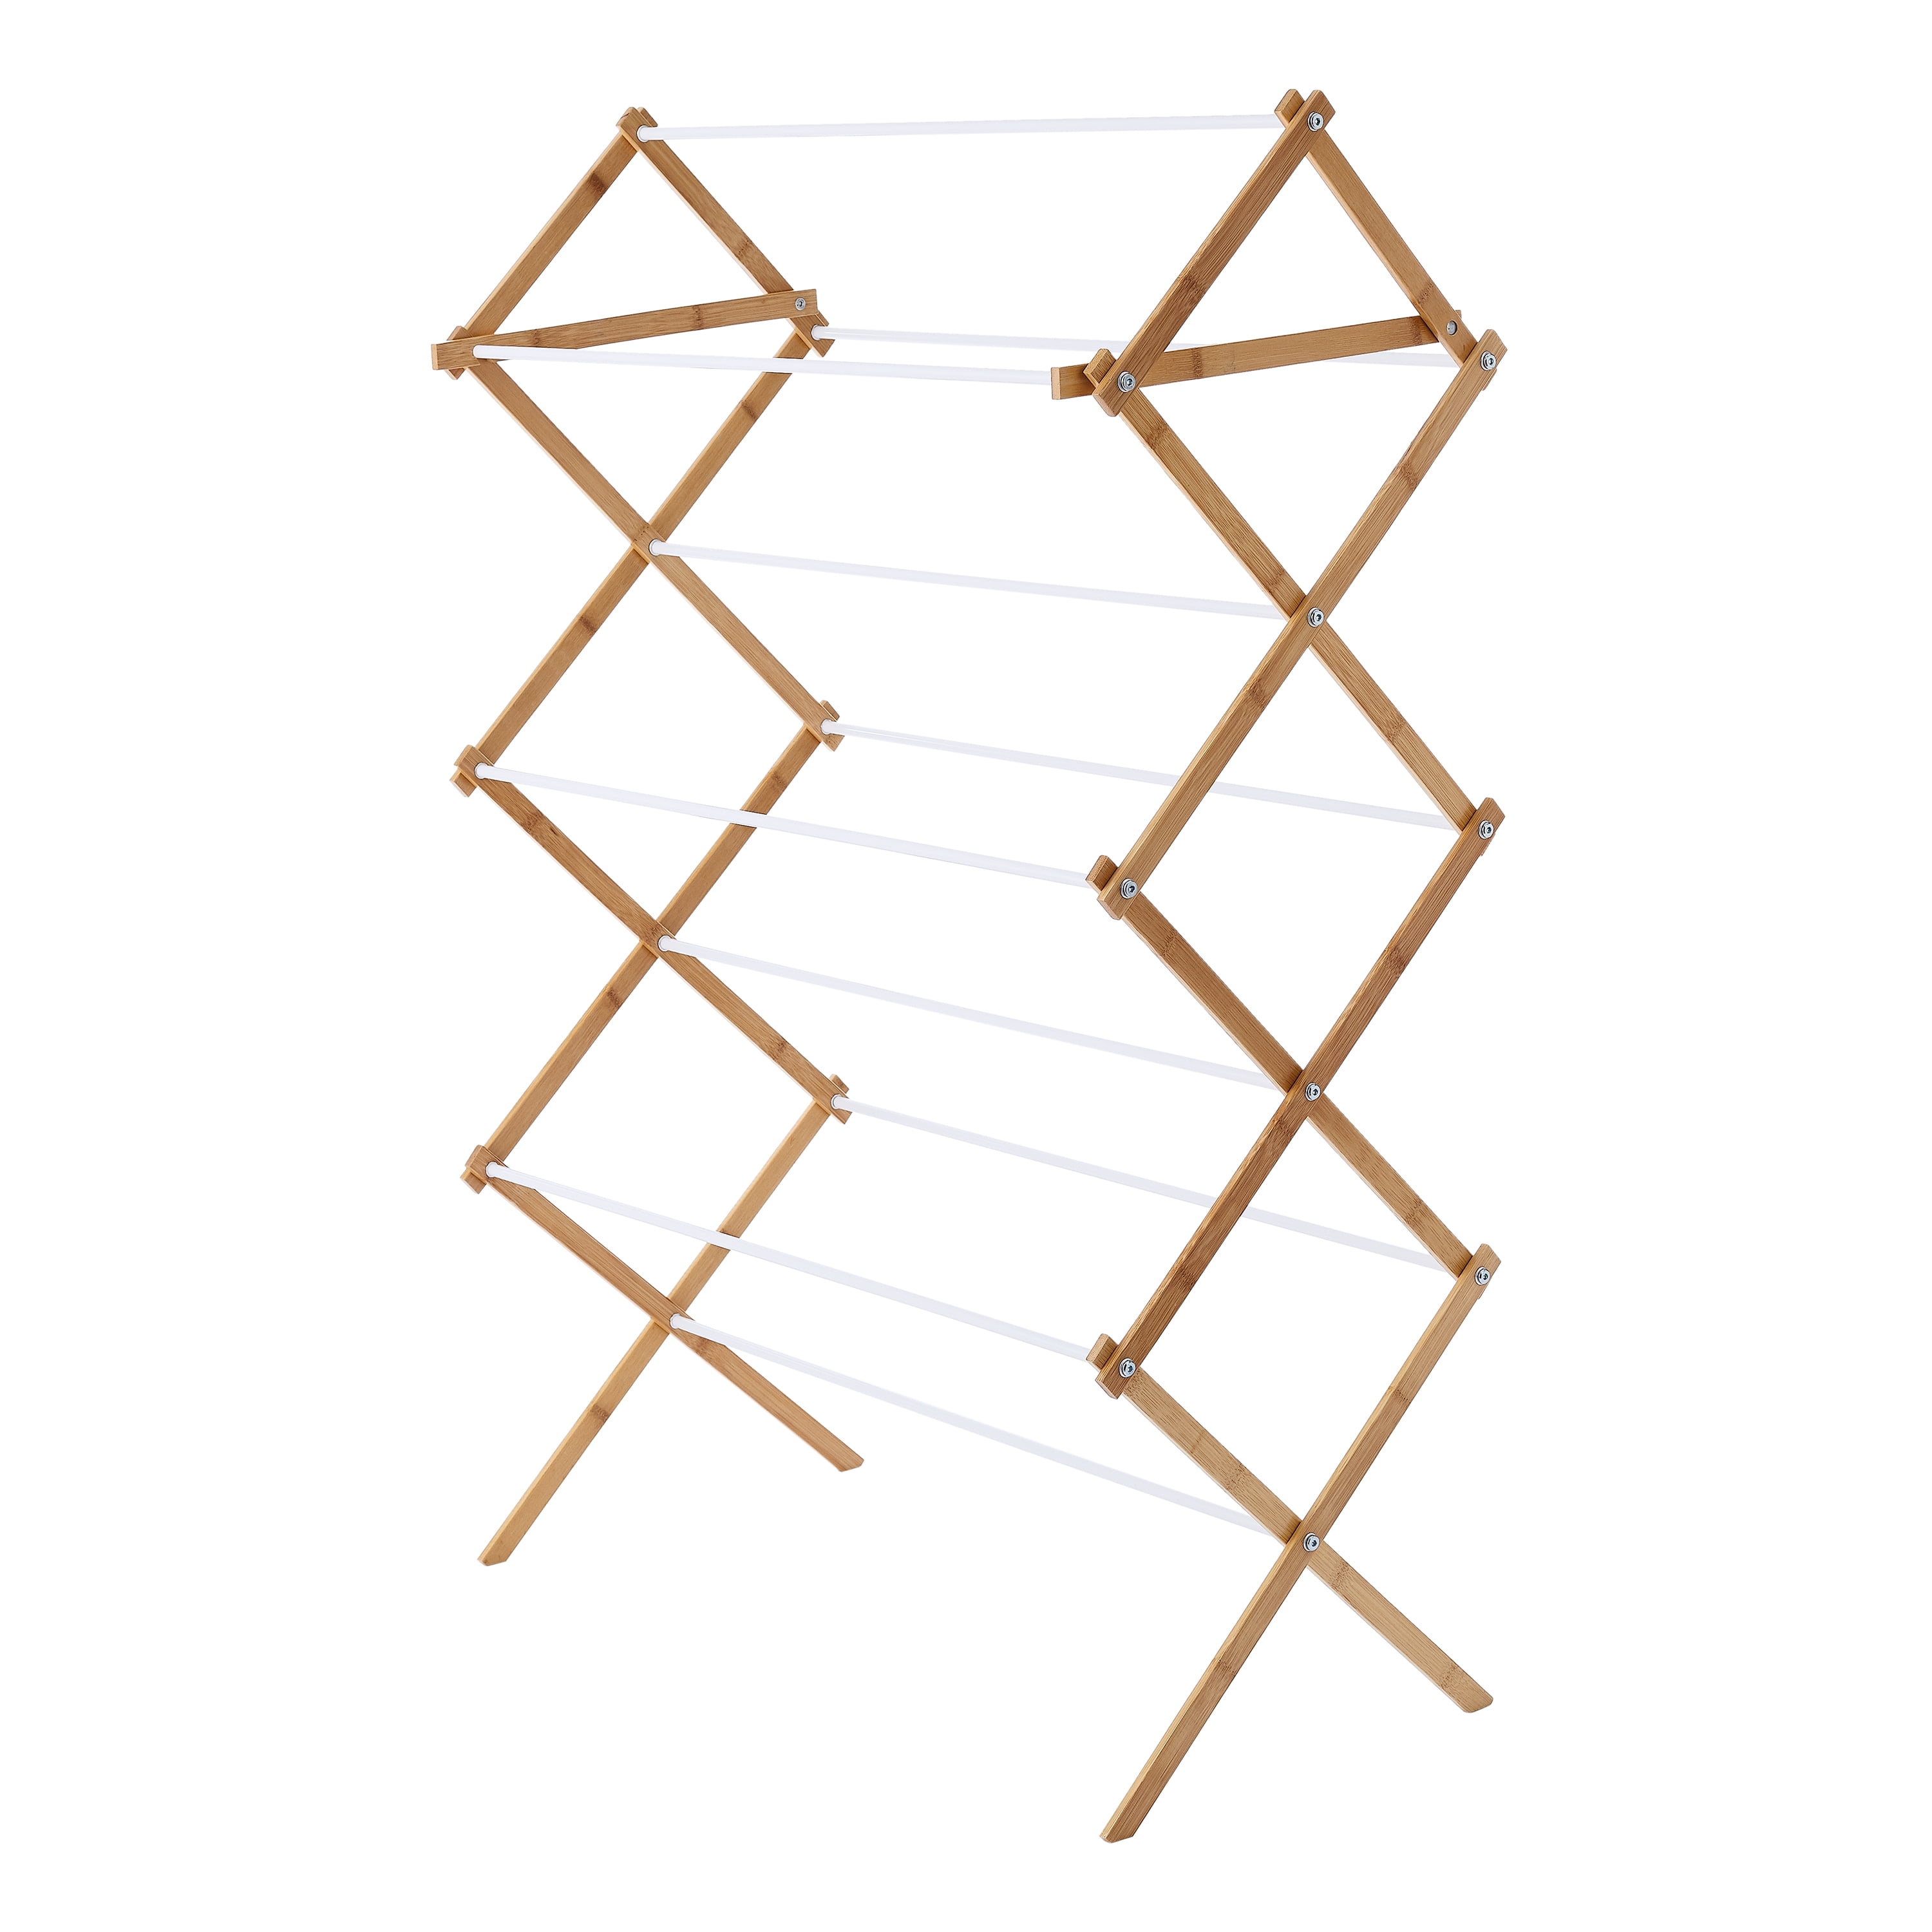  VOSAREA 1Pc Drying Rack Hanging Dry Net Clothes